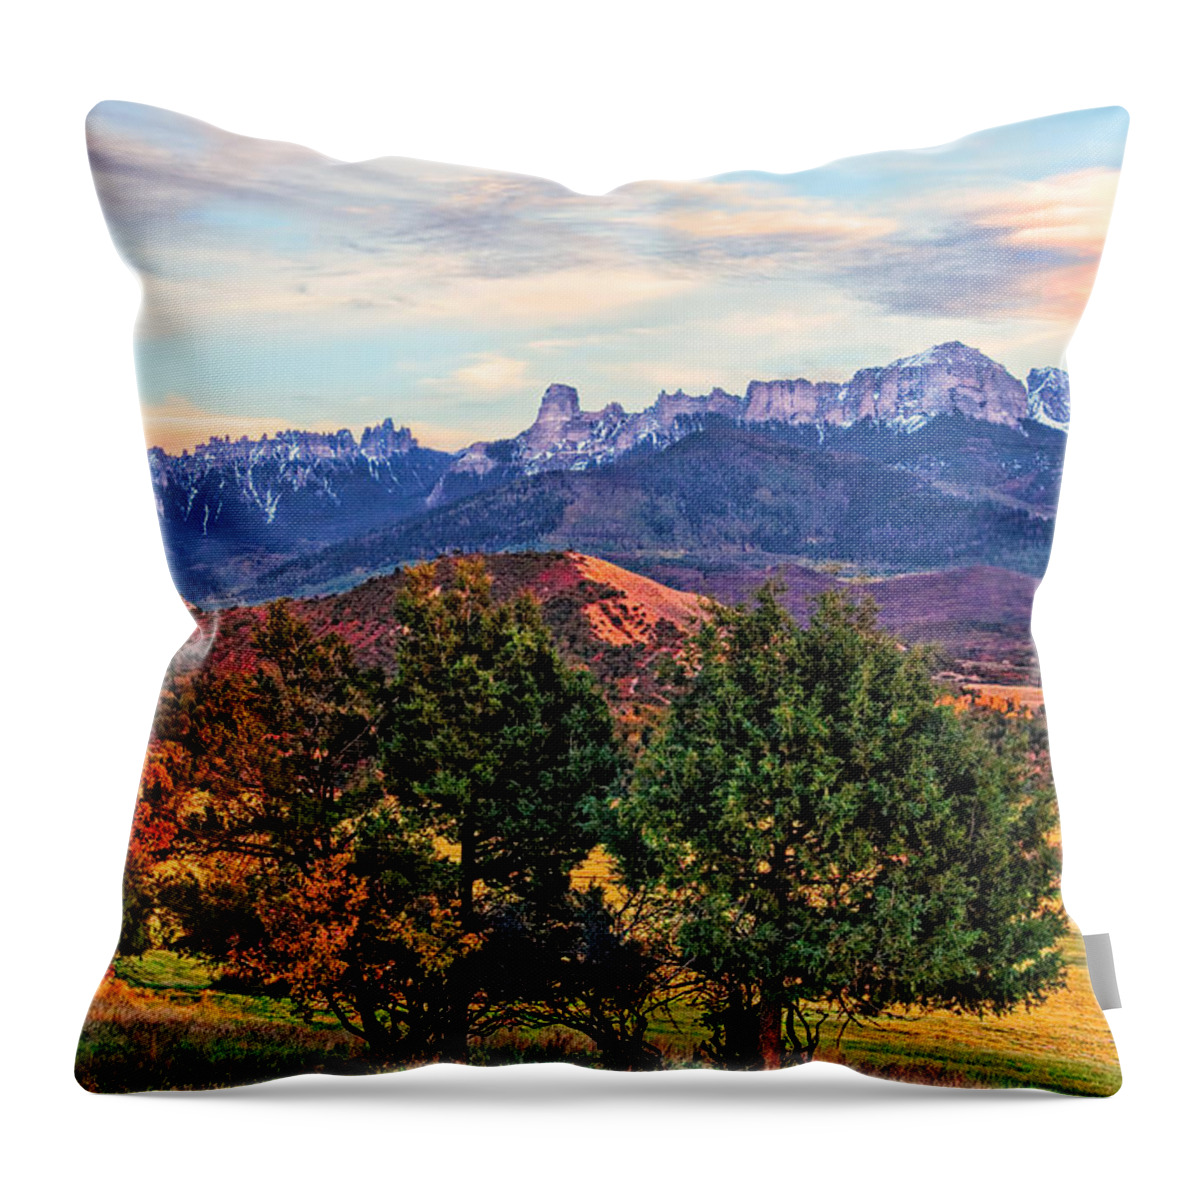 Autum Throw Pillow featuring the photograph Sunset Over Owl Creek Pass by Rick Wicker